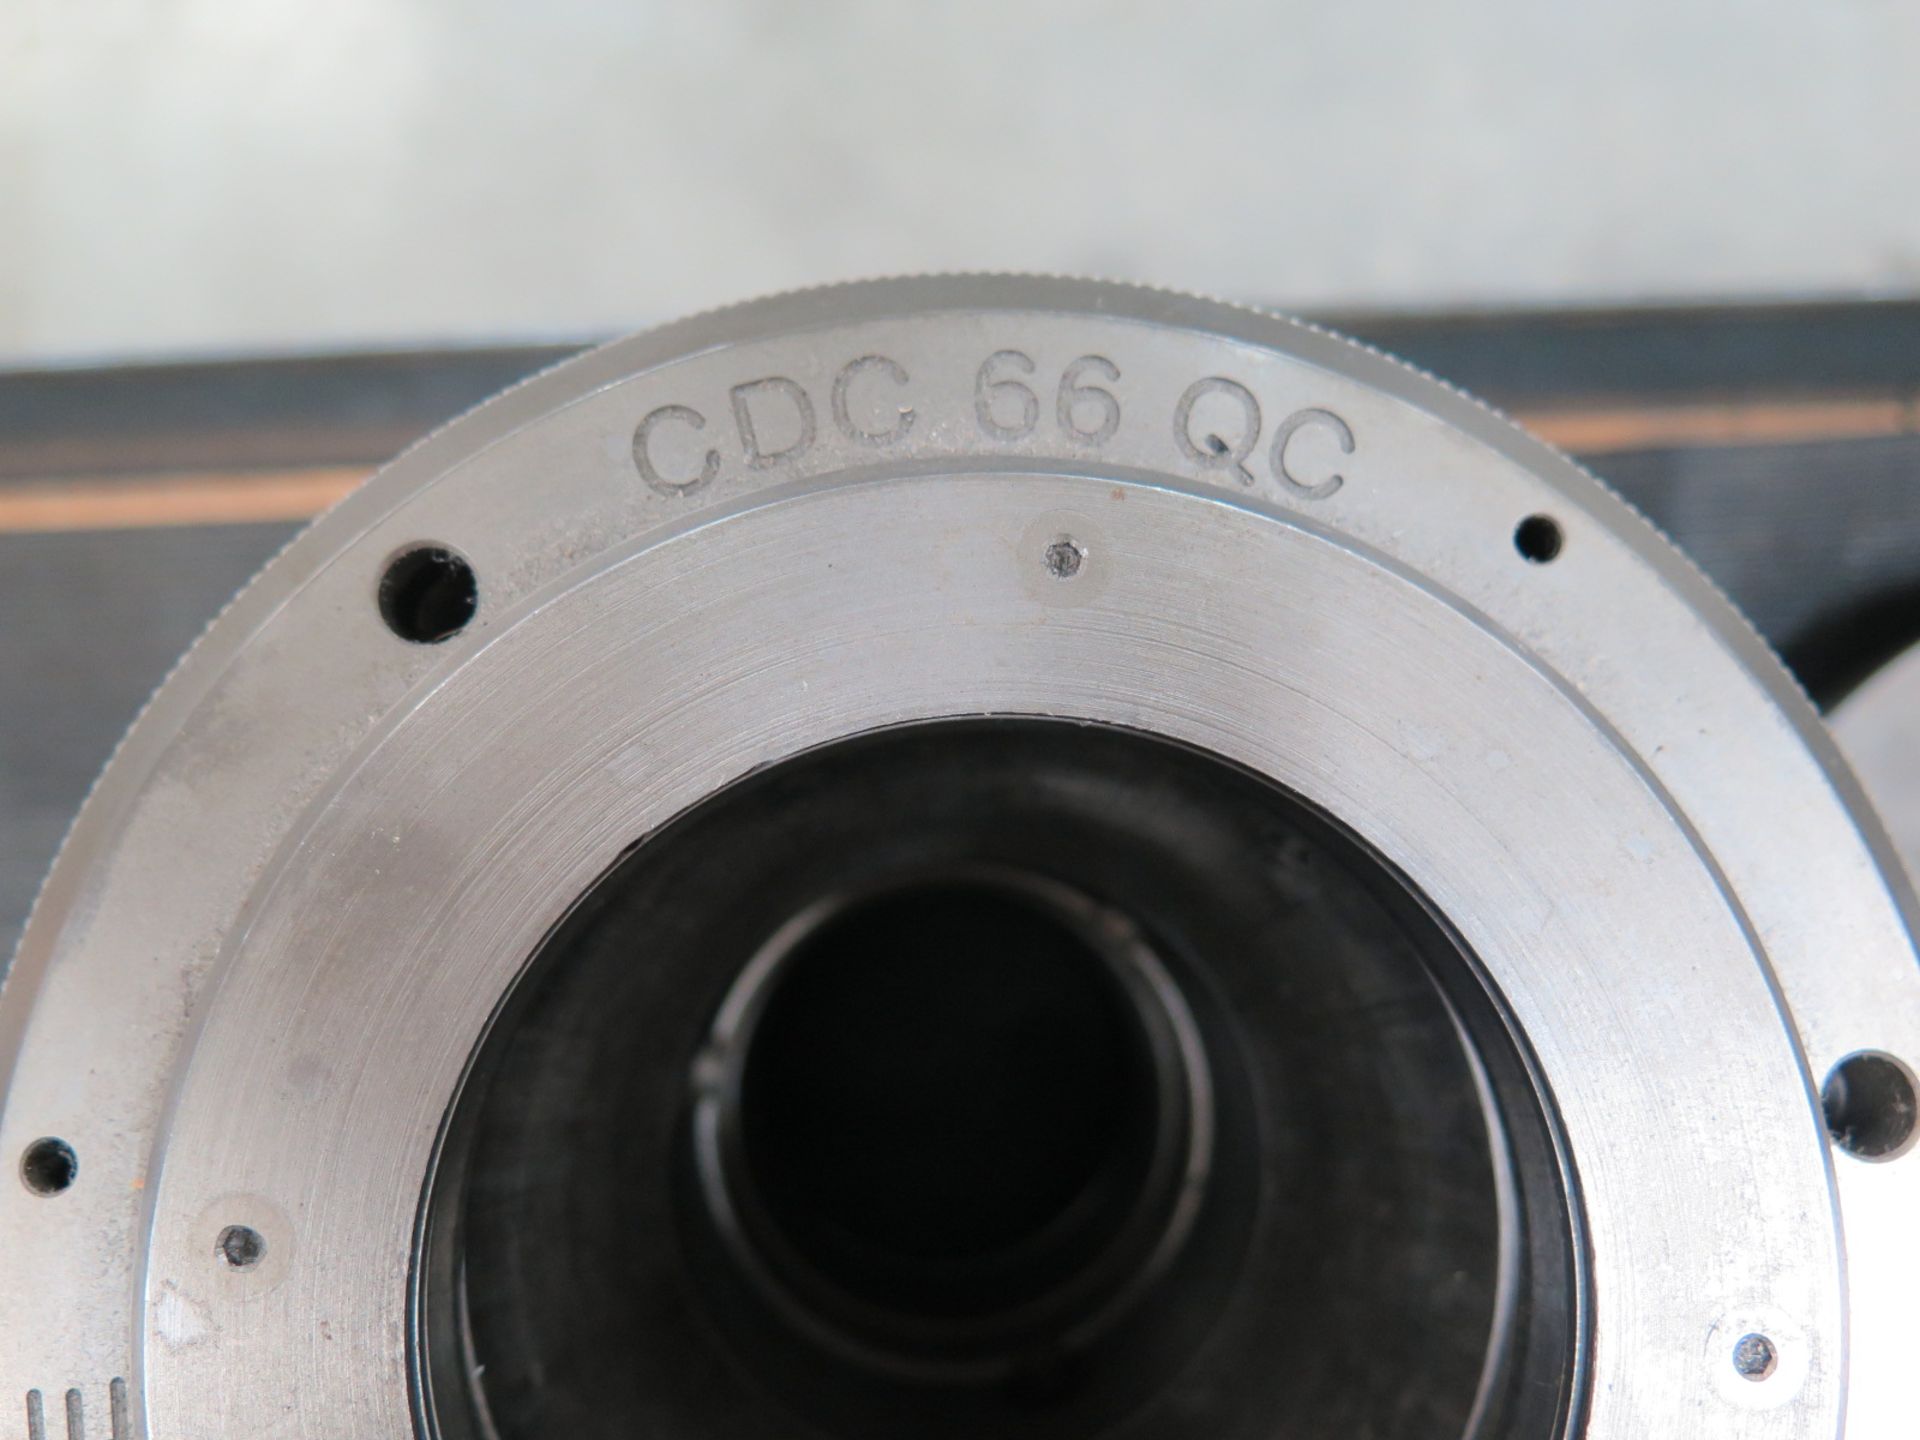 Royal CDC 66 QC "Q-Change" Spindle Collet  Chuck - Image 2 of 2